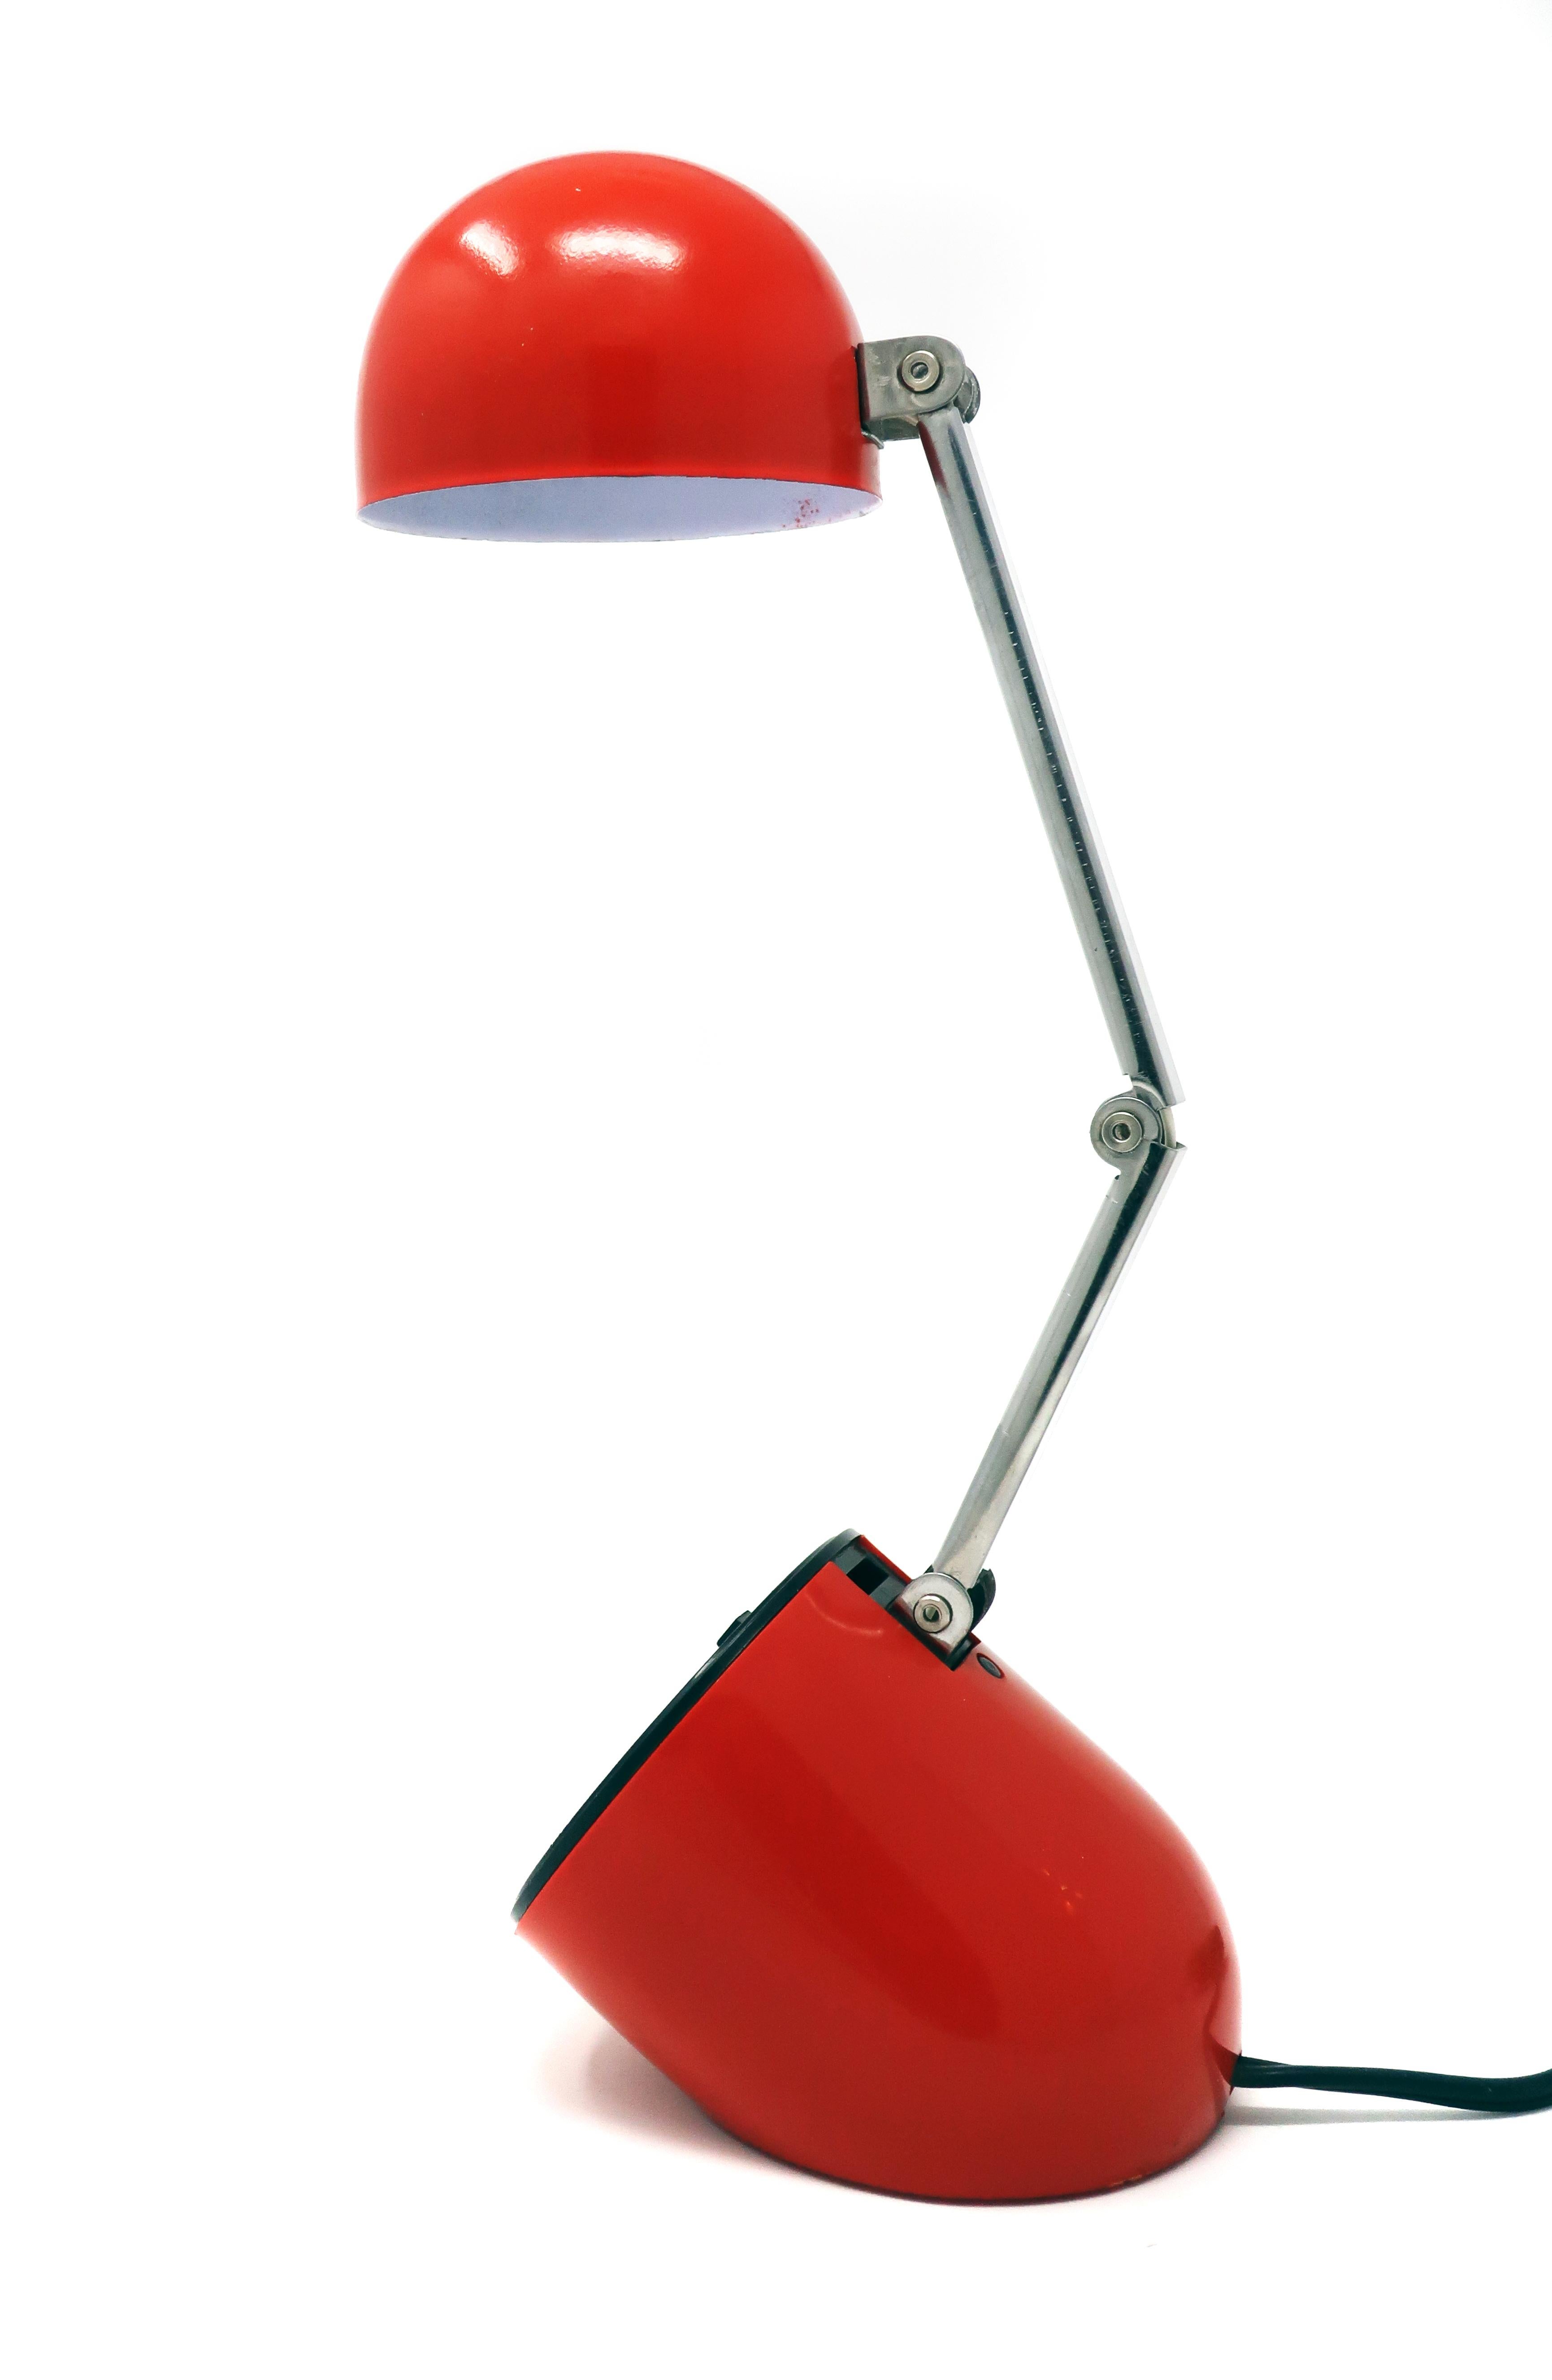 A Classic of Mid-Century Modern lighting design, this small lamp unfolds from a perfect pill shape into a perfect desk lamp. Red base and shade, chrome stem, and 2 intensity switch on base. In excellent vintage condition with one small mark on the